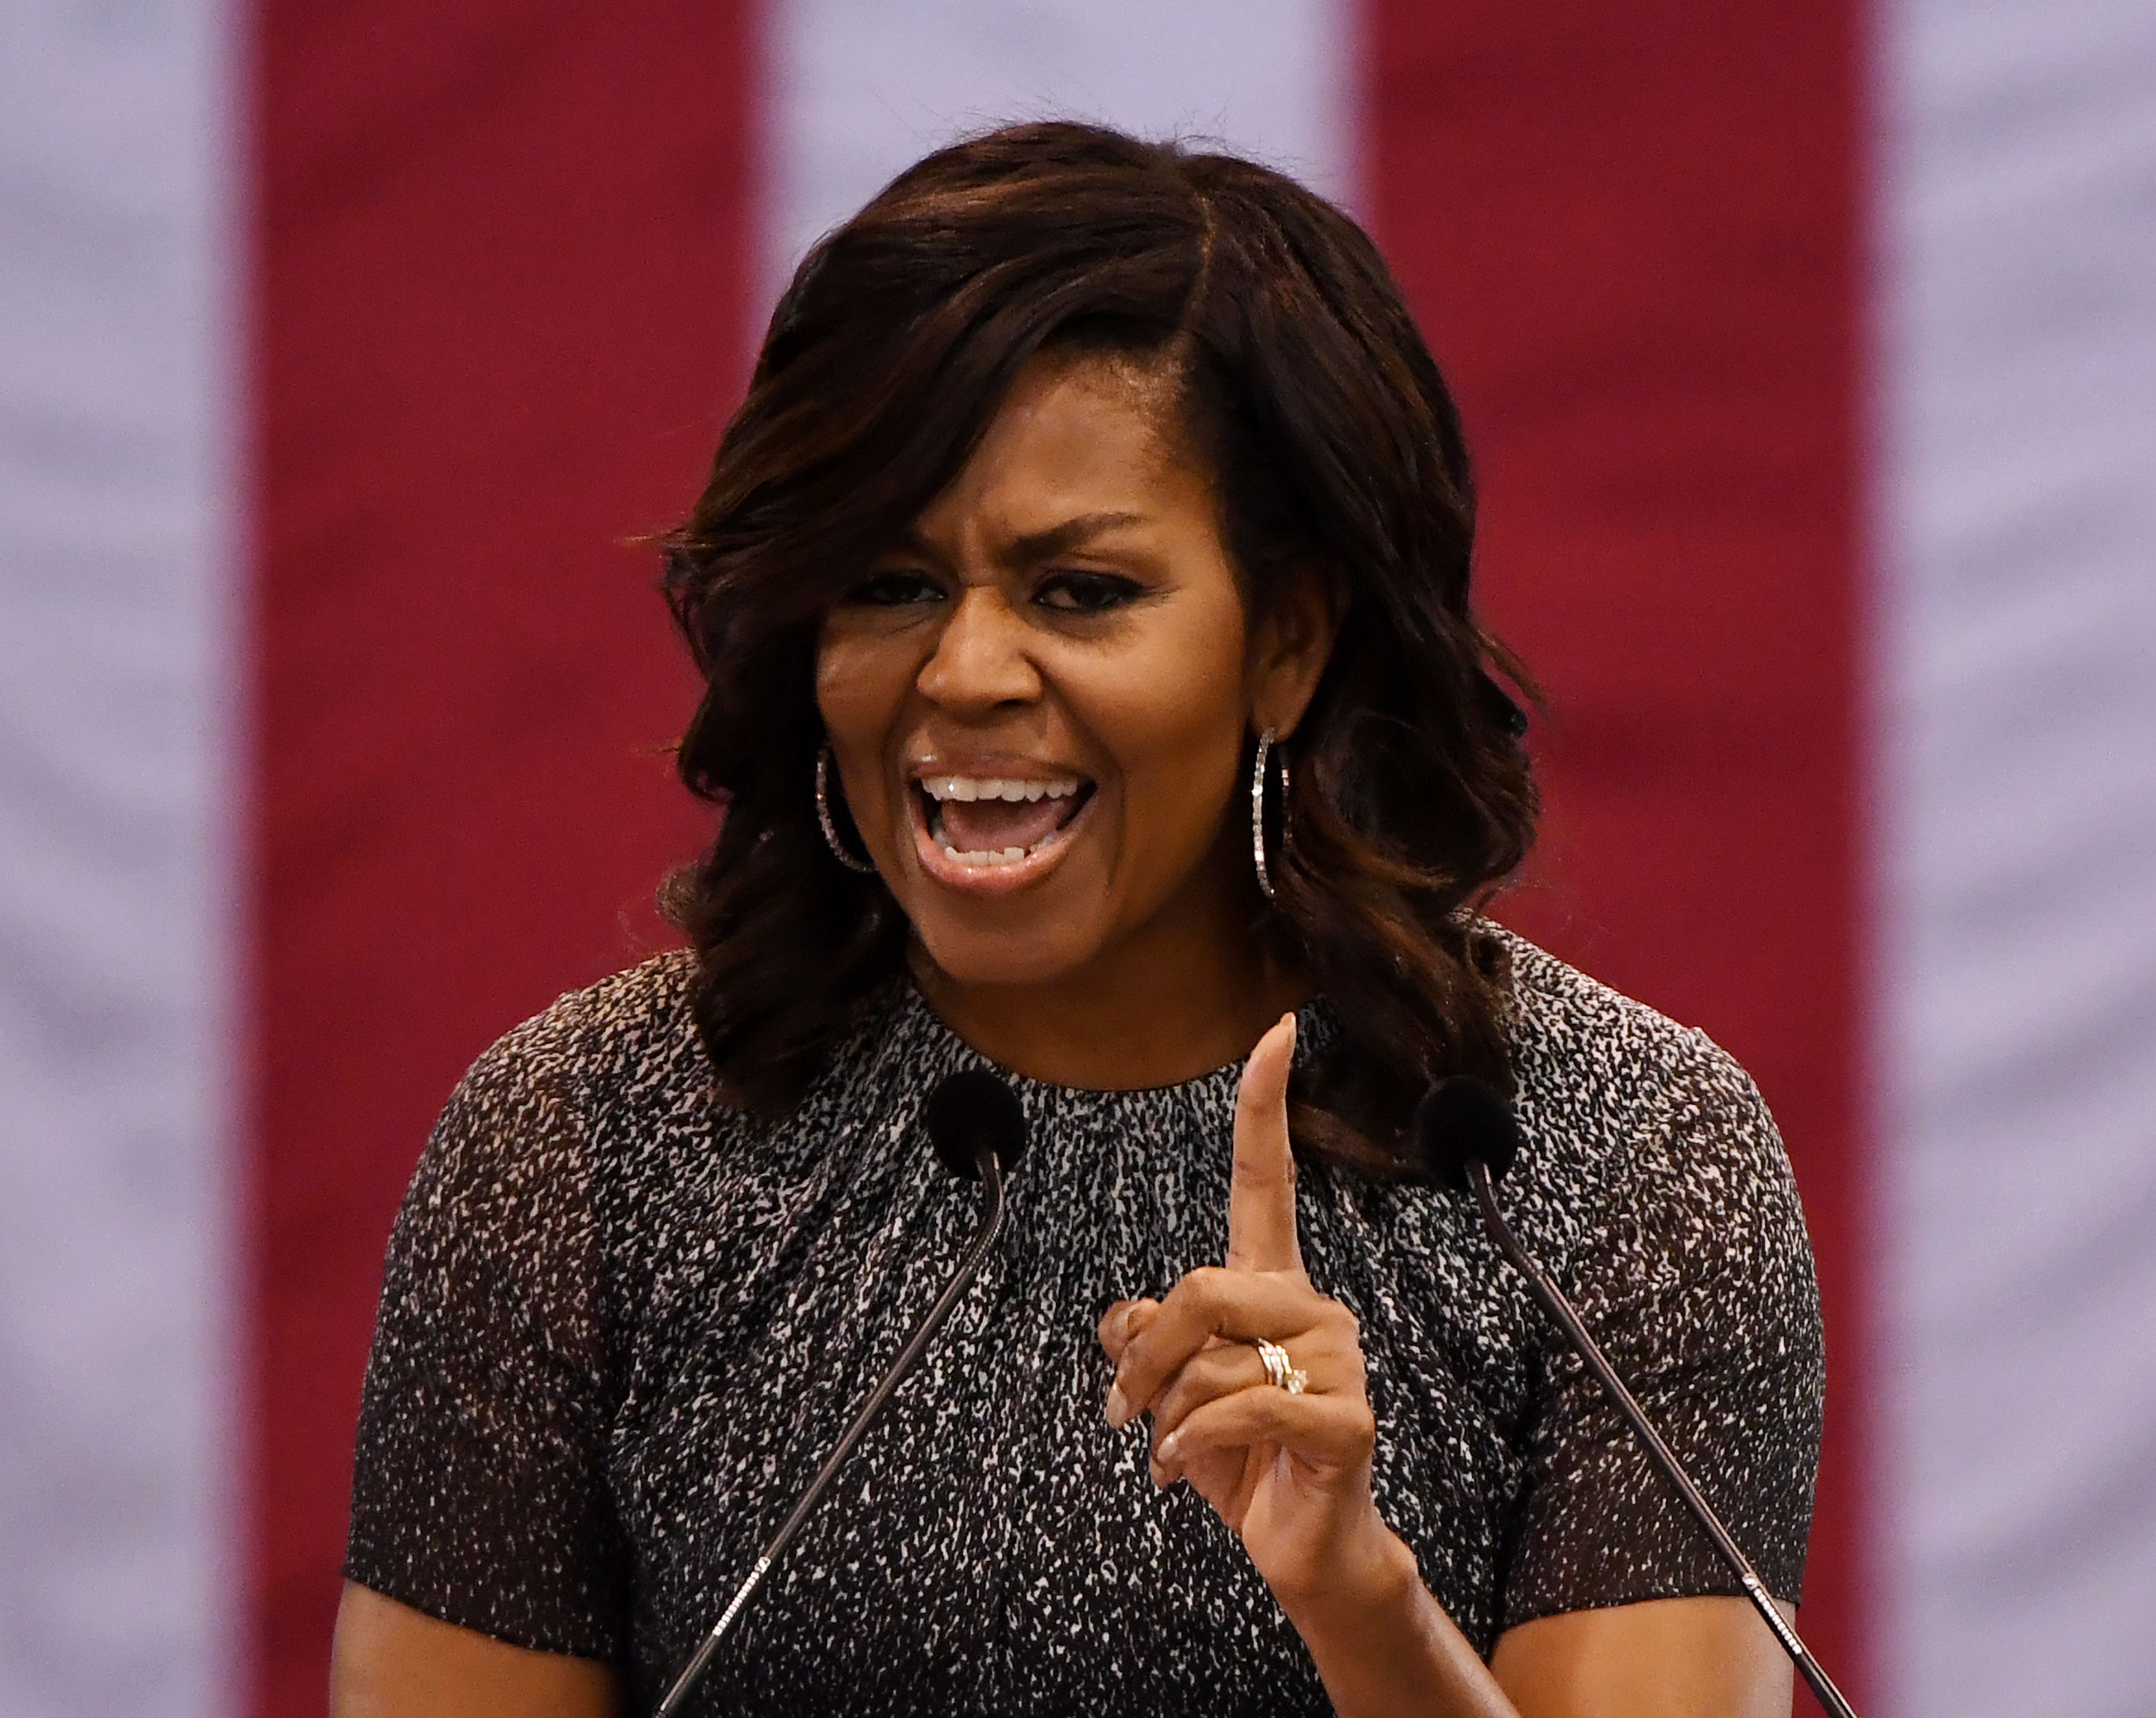 Michelle Obama Campaigns for Clinton in Arizona, Blasts Trump’s Vision of ‘Hopelessness and Despair’